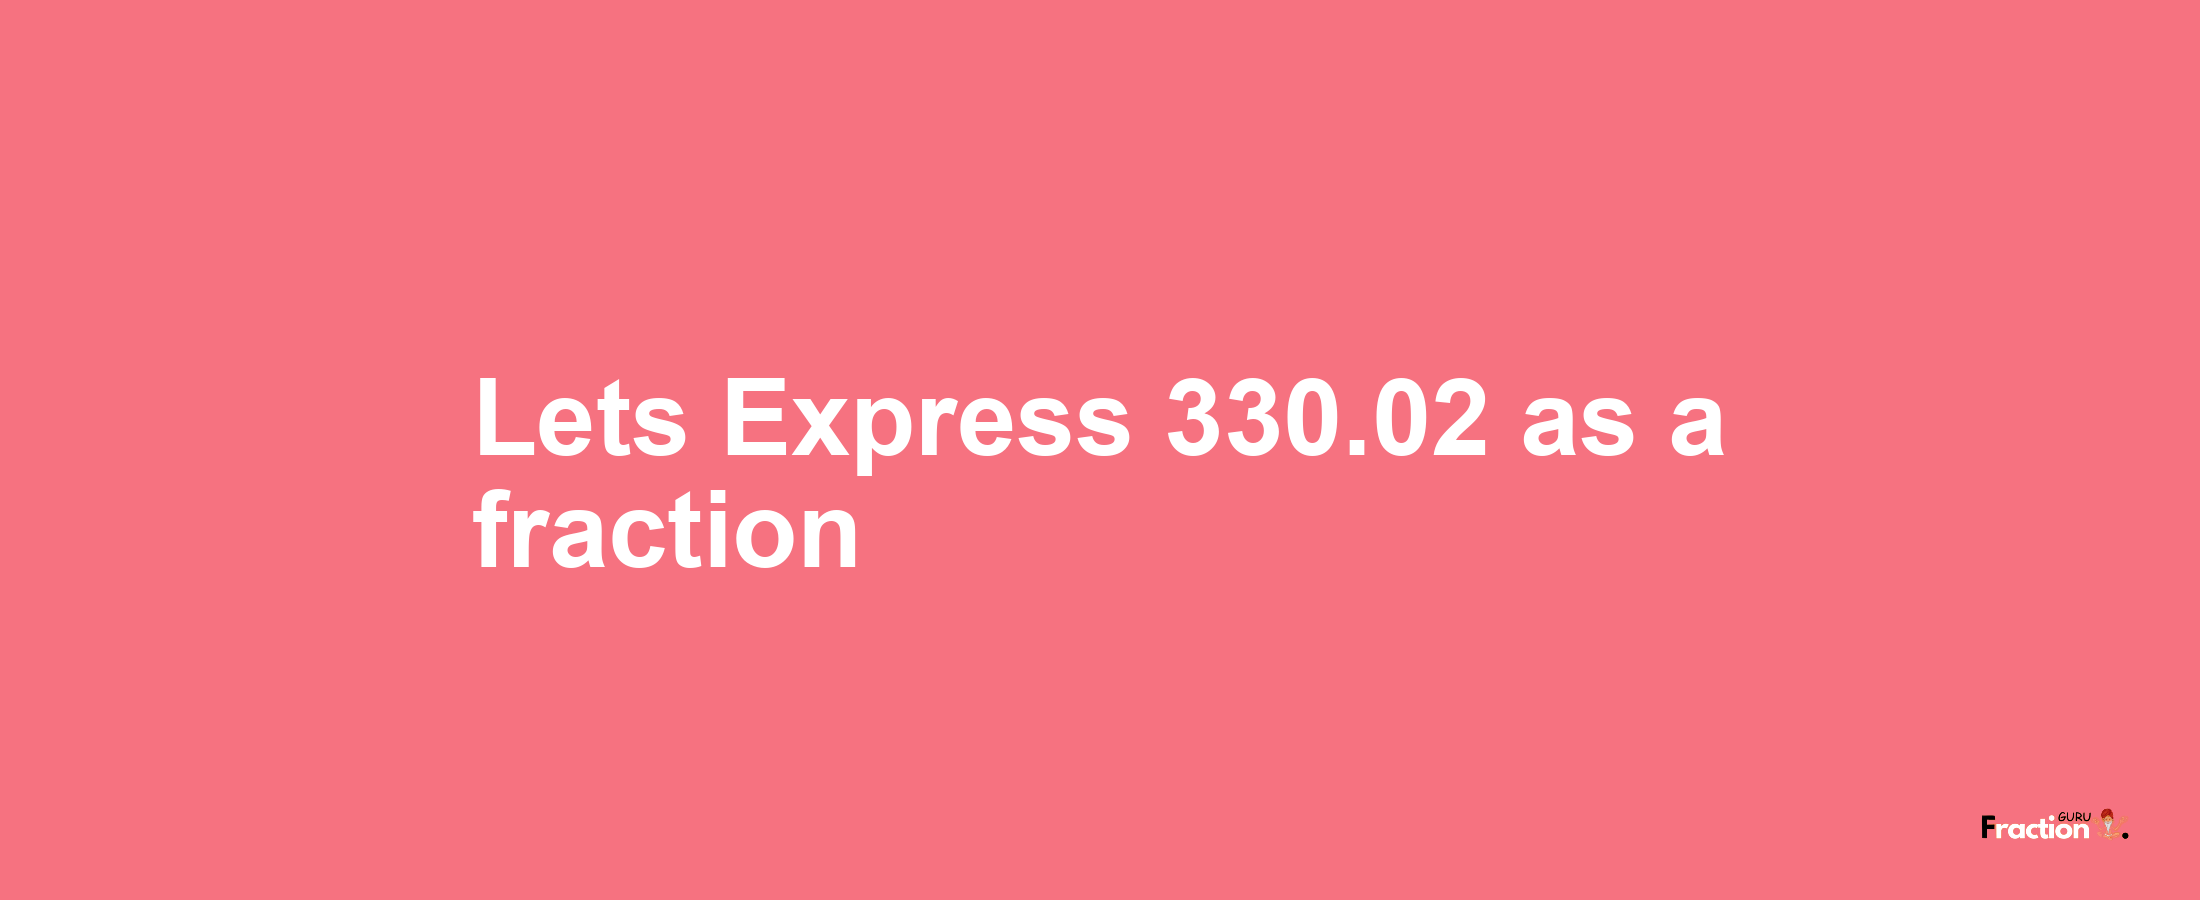 Lets Express 330.02 as afraction